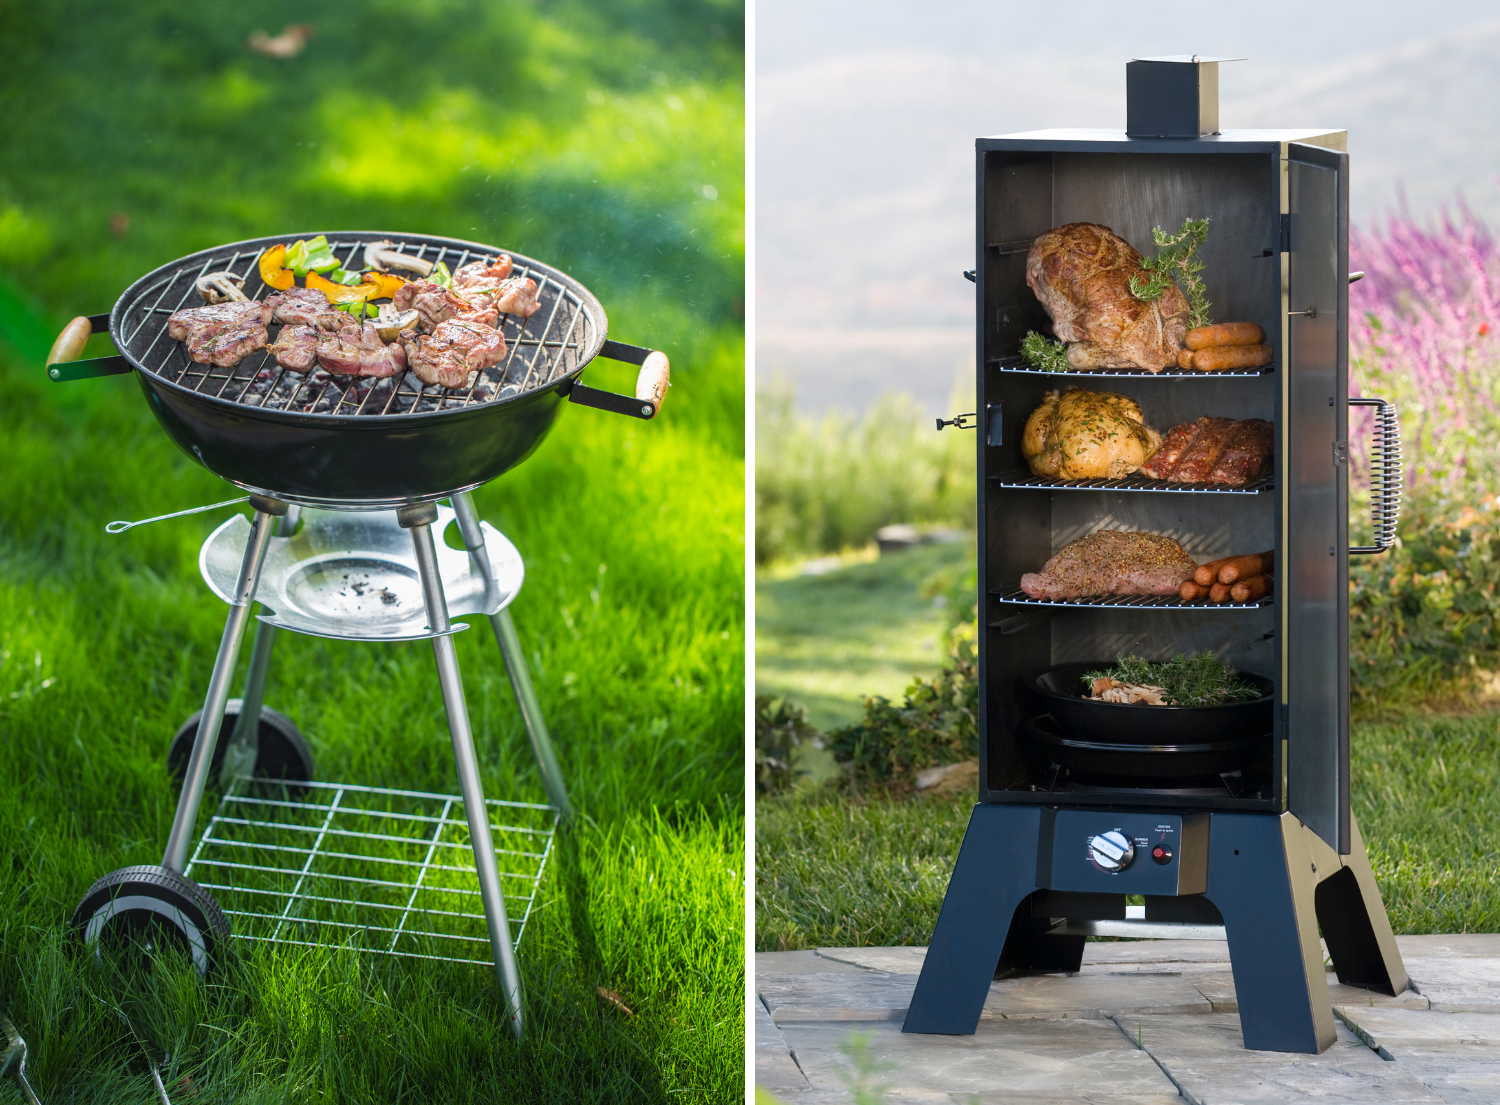 Smoker vs. Grill: What's the Difference?